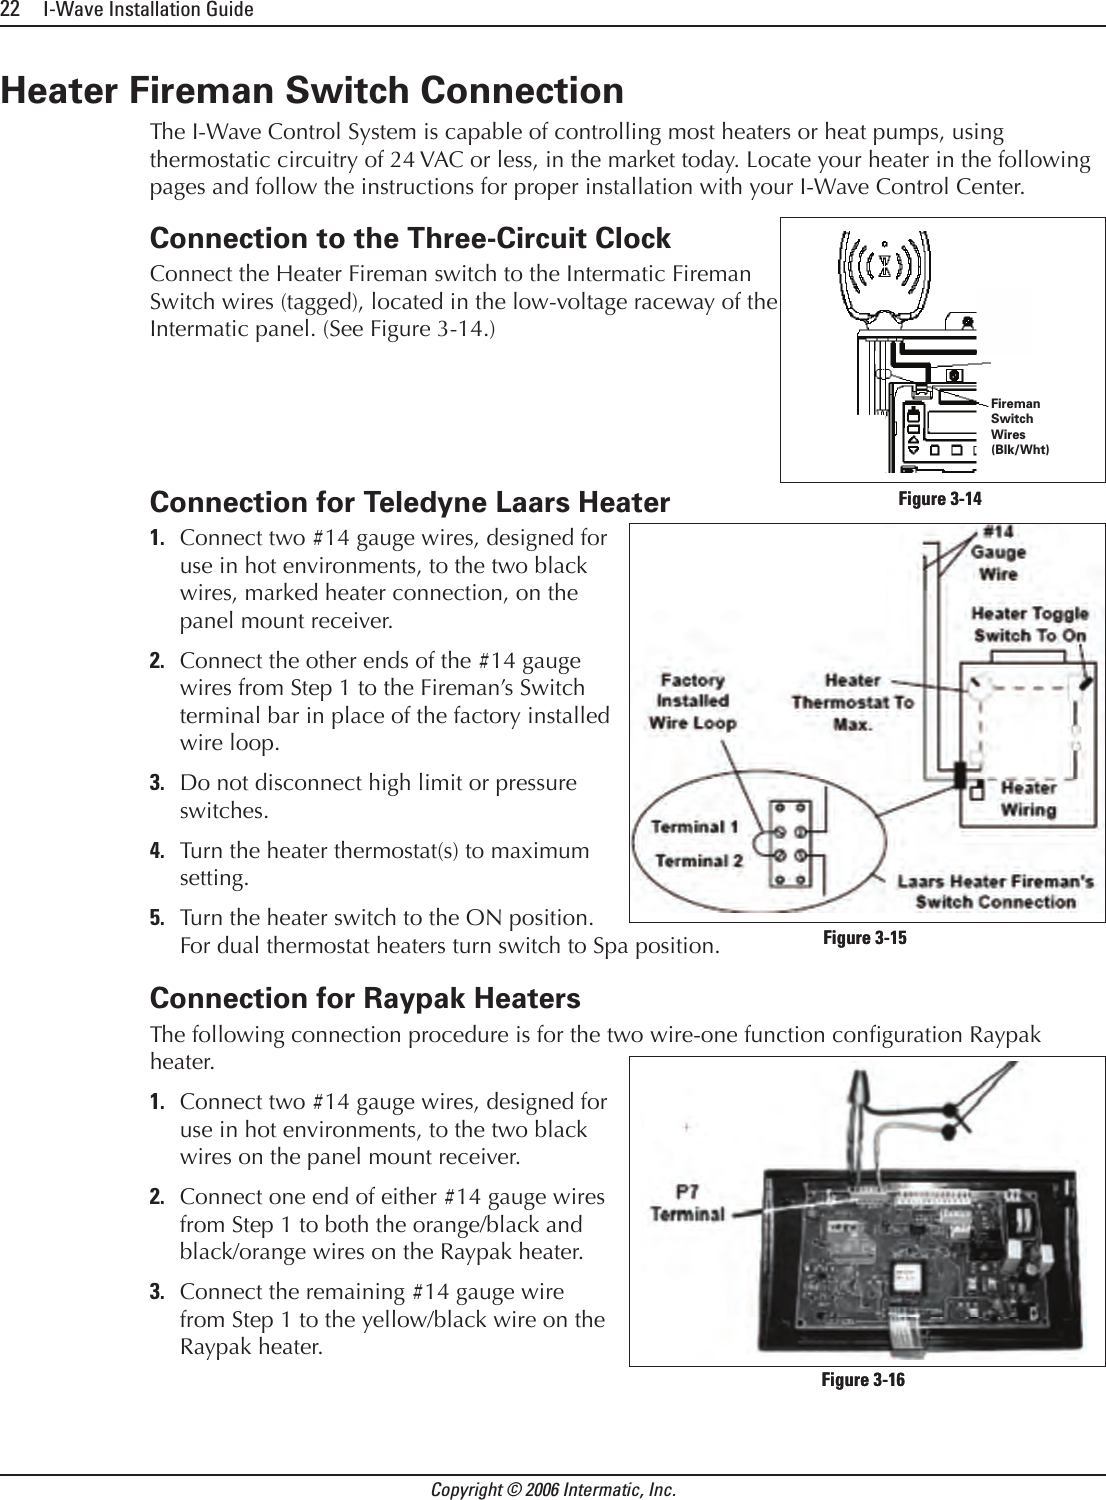 22     I-Wave Installation GuideCopyright © 2006 Intermatic, Inc.Heater Fireman Switch ConnectionThe I-Wave Control System is capable of controlling most heaters or heat pumps, using thermostatic circuitry of 24 VAC or less, in the market today. Locate your heater in the following pages and follow the instructions for proper installation with your I-Wave Control Center.Connection to the Three-Circuit ClockConnect the Heater Fireman switch to the Intermatic Fireman Switch wires (tagged), located in the low-voltage raceway of the Intermatic panel. (See Figure 3-14.)Connection for Teledyne Laars HeaterConnect two #14 gauge wires, designed for use in hot environments, to the two black wires, marked heater connection, on the panel mount receiver.Connect the other ends of the #14 gauge wires from Step 1 to the Fireman’s Switch terminal bar in place of the factory installed wire loop.Do not disconnect high limit or pressure switches.Turn the heater thermostat(s) to maximum setting.Turn the heater switch to the ON position. For dual thermostat heaters turn switch to Spa position.Connection for Raypak HeatersThe following connection procedure is for the two wire-one function conguration Raypak heater.Connect two #14 gauge wires, designed for use in hot environments, to the two black wires on the panel mount receiver.Connect one end of either #14 gauge wires from Step 1 to both the orange/black and black/orange wires on the Raypak heater.Connect the remaining #14 gauge wire from Step 1 to the yellow/black wire on the Raypak heater.1.2.3.4.5.1.2.3.Fireman SwitchWires(Blk/Wht)Fireman SwitchWires(Blk/Wht)Figure 3-14Figure 3-14Figure 3-15Figure 3-15Figure 3-16Figure 3-16